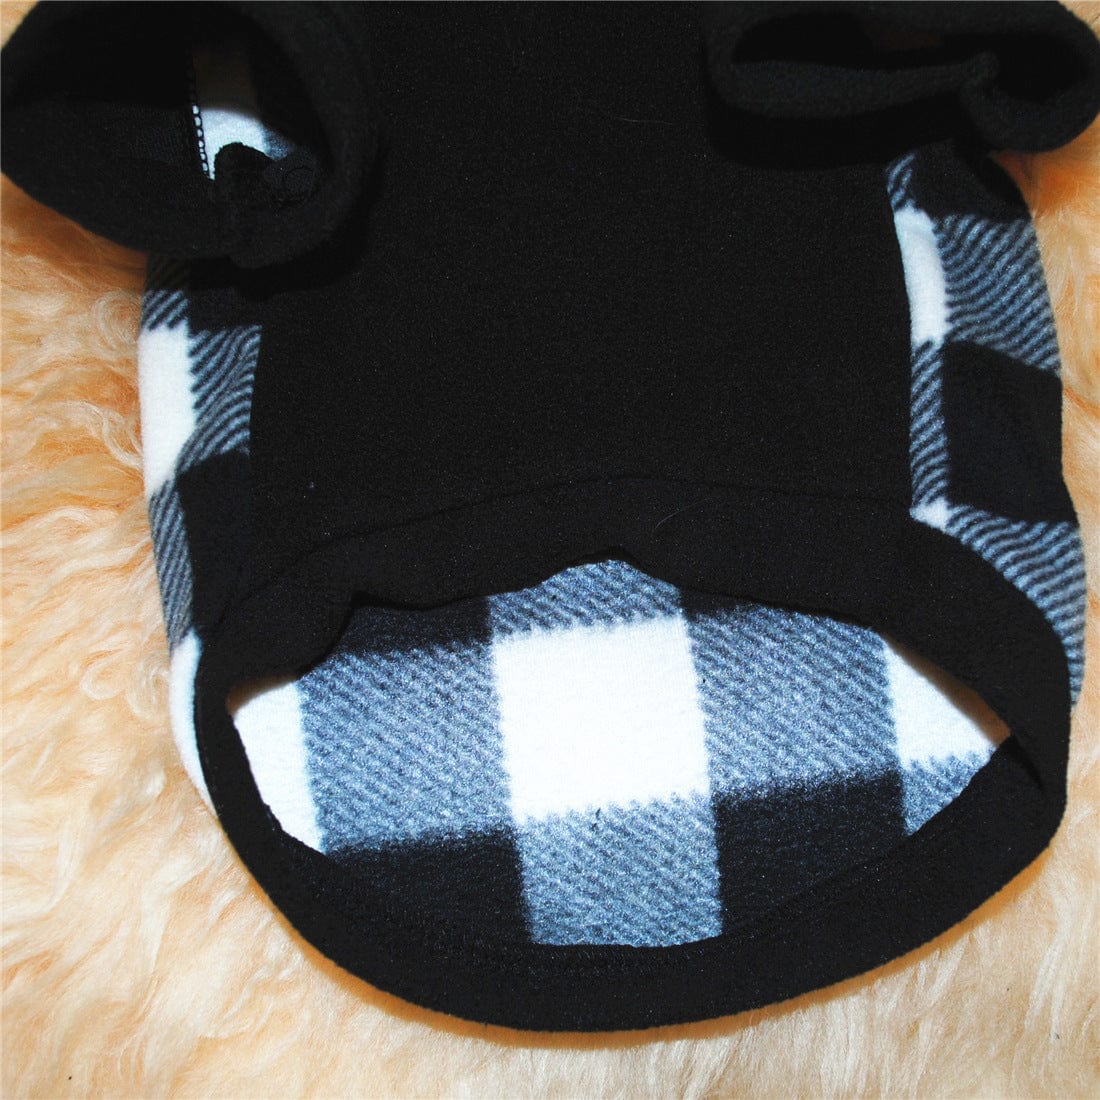 eszy2find pet clothing Pet Supplies Dog Winter Hooded Clothing Sweater